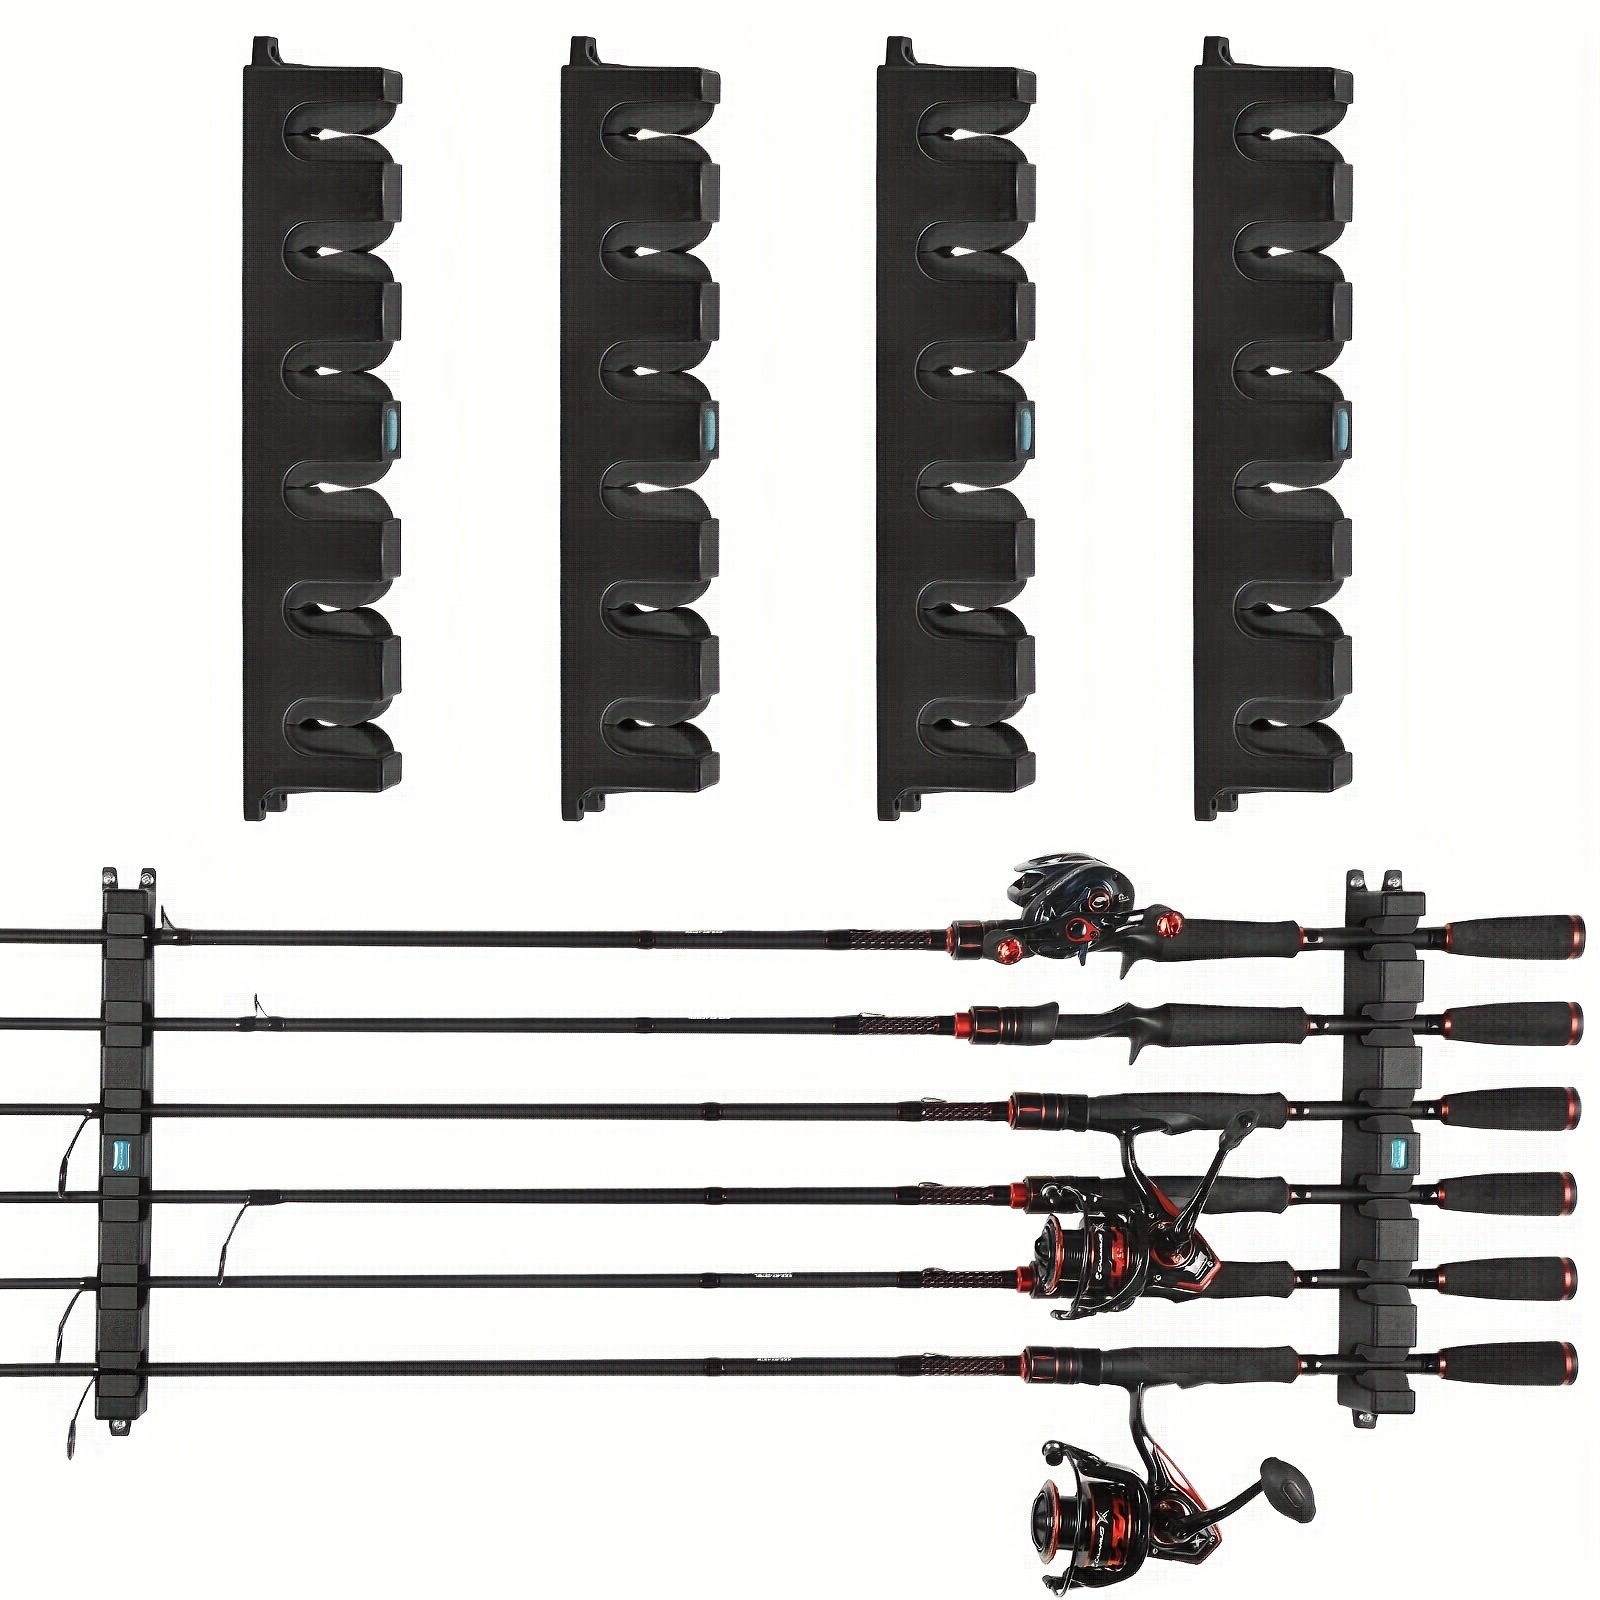 * Vertical Fishing Rod Holder Wall-Mounted Fishing Rod Rack For Hotel,  Stores 6 Rods Or Fishing Rod Combos In 13.6 Inches, Great Fishing Pole Holde